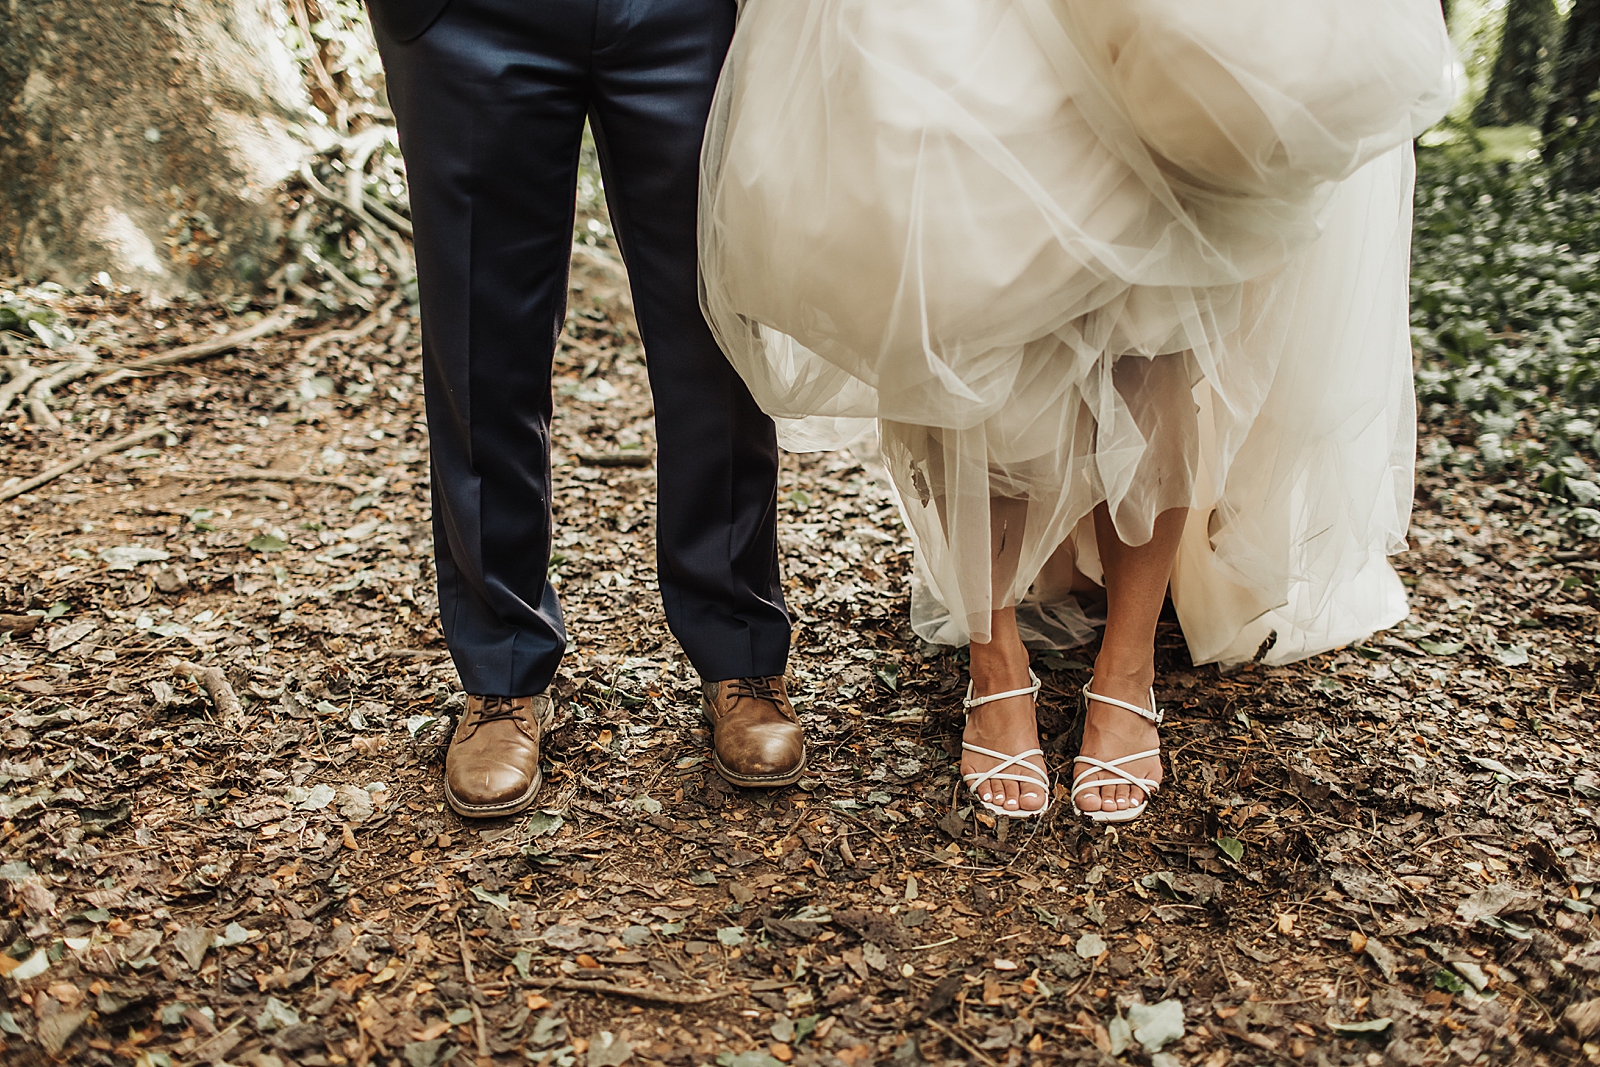 Closeup of Bride and Groom;s feet on the ground of the forest